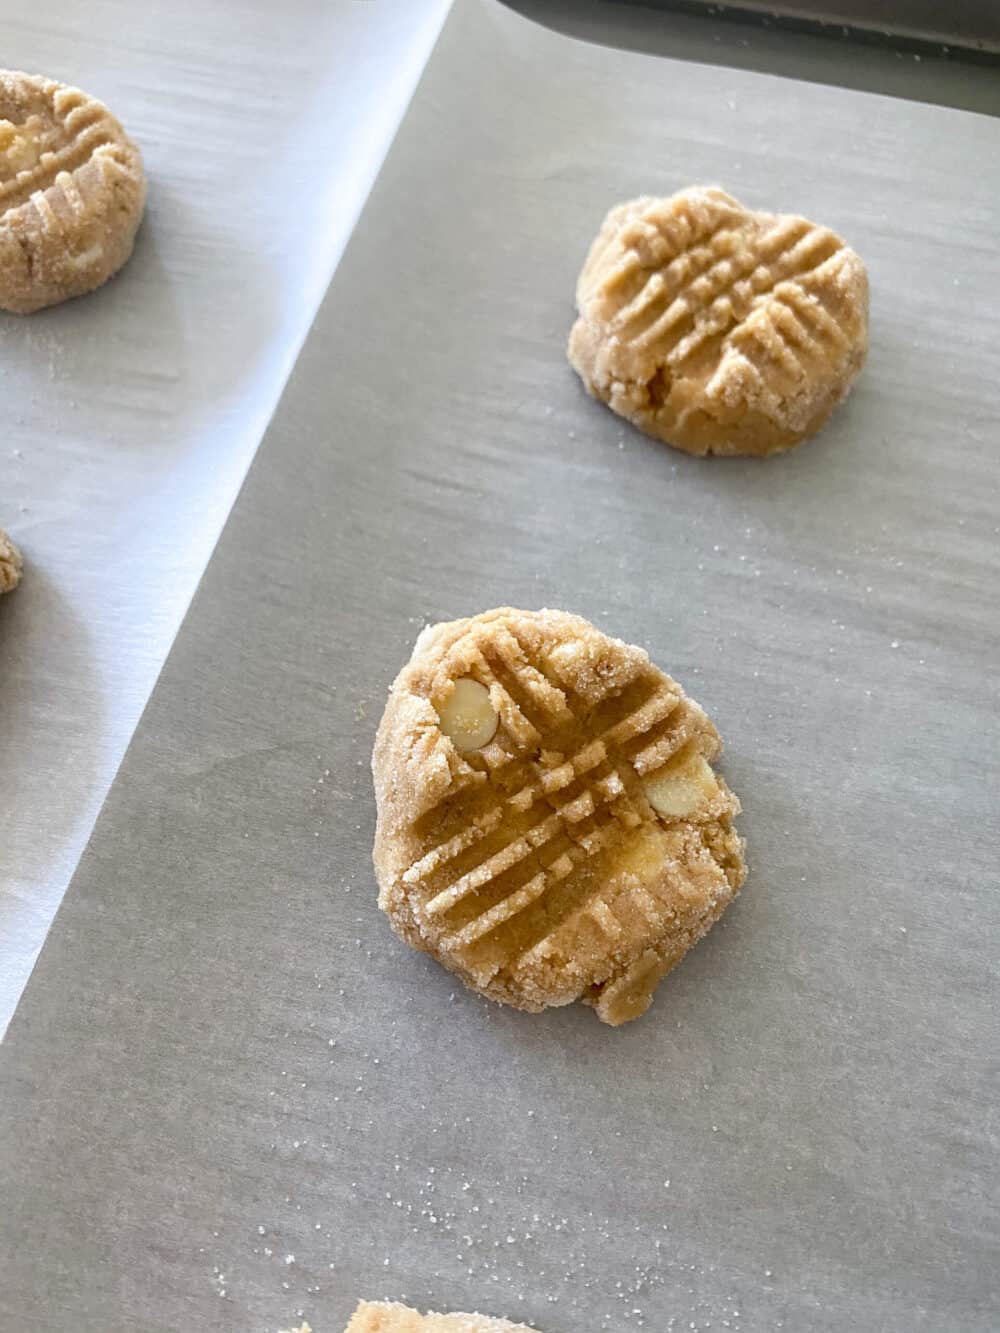 Two Unbaked Apple Peanut Butter Cookies on a Baking Pan